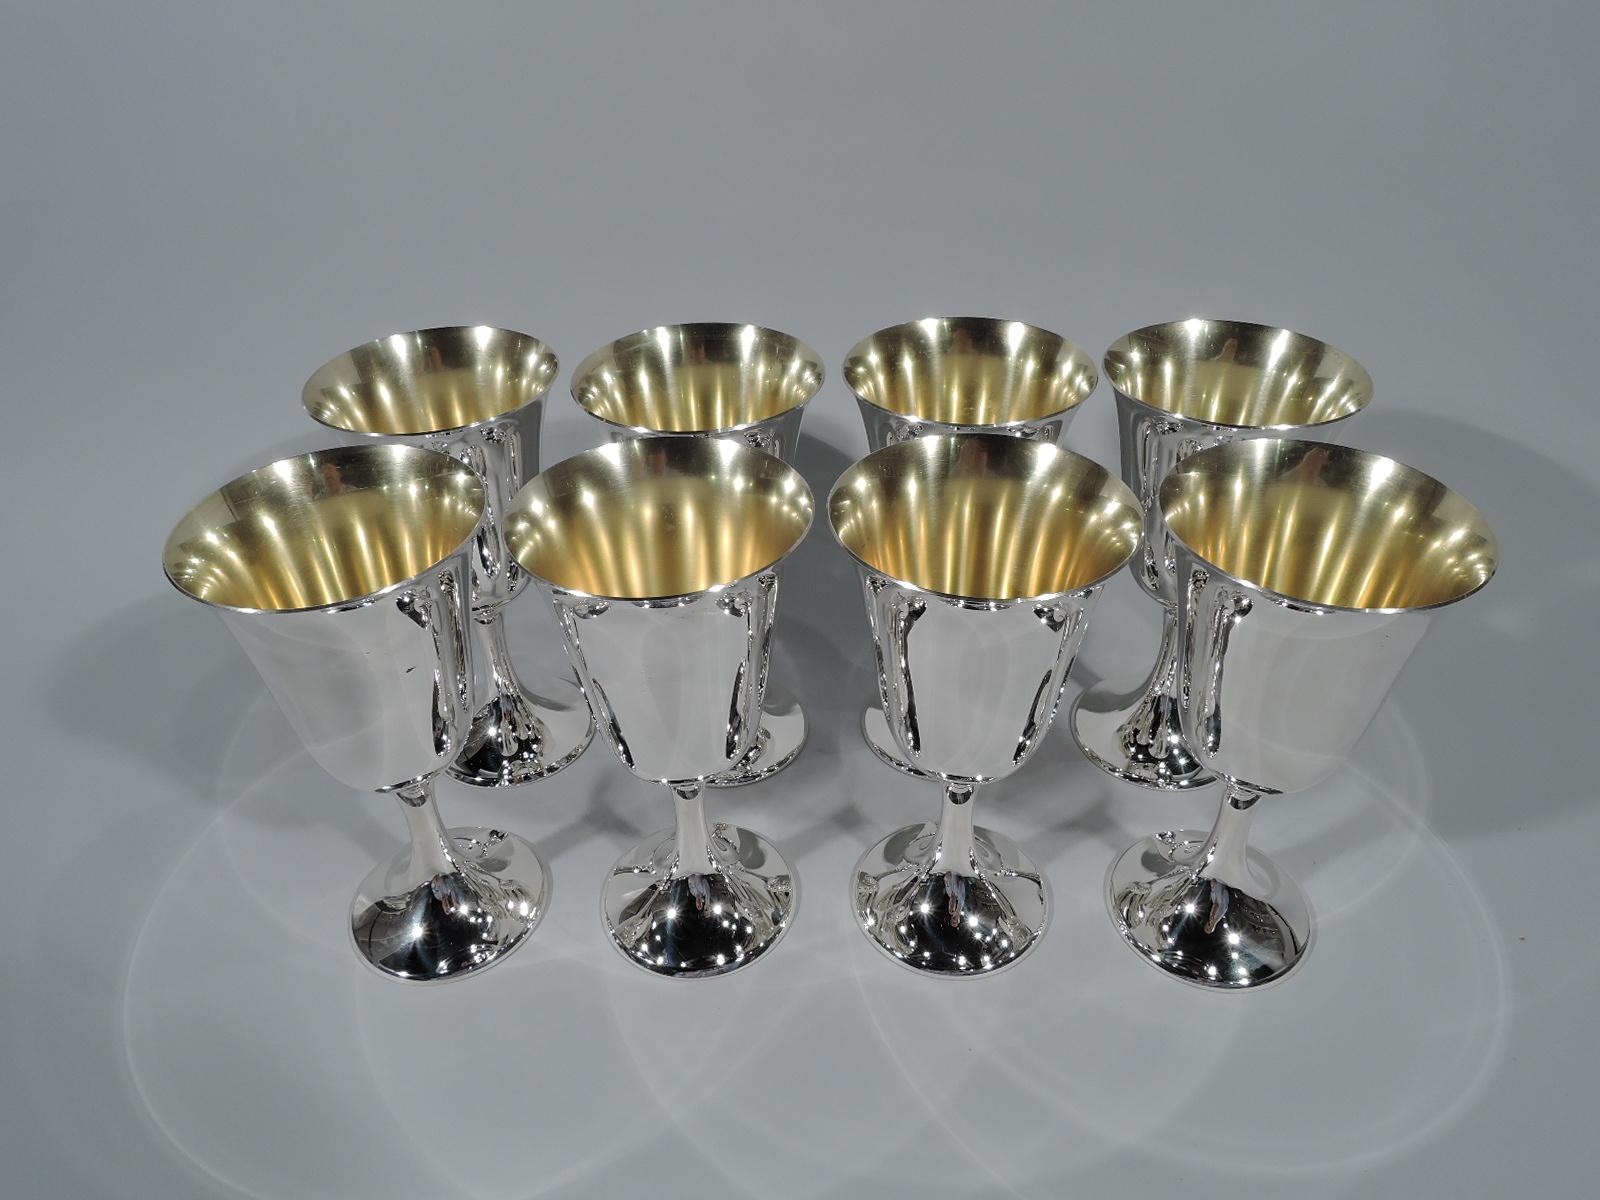 Set of eight sterling silver goblets. Made by Gorham in Providence. Each: Tapering bowl with flared rim, slender stem, and raised foot. Gilt-washed interior. Hallmark includes no. 272. Total weight: 48 troy ounces.